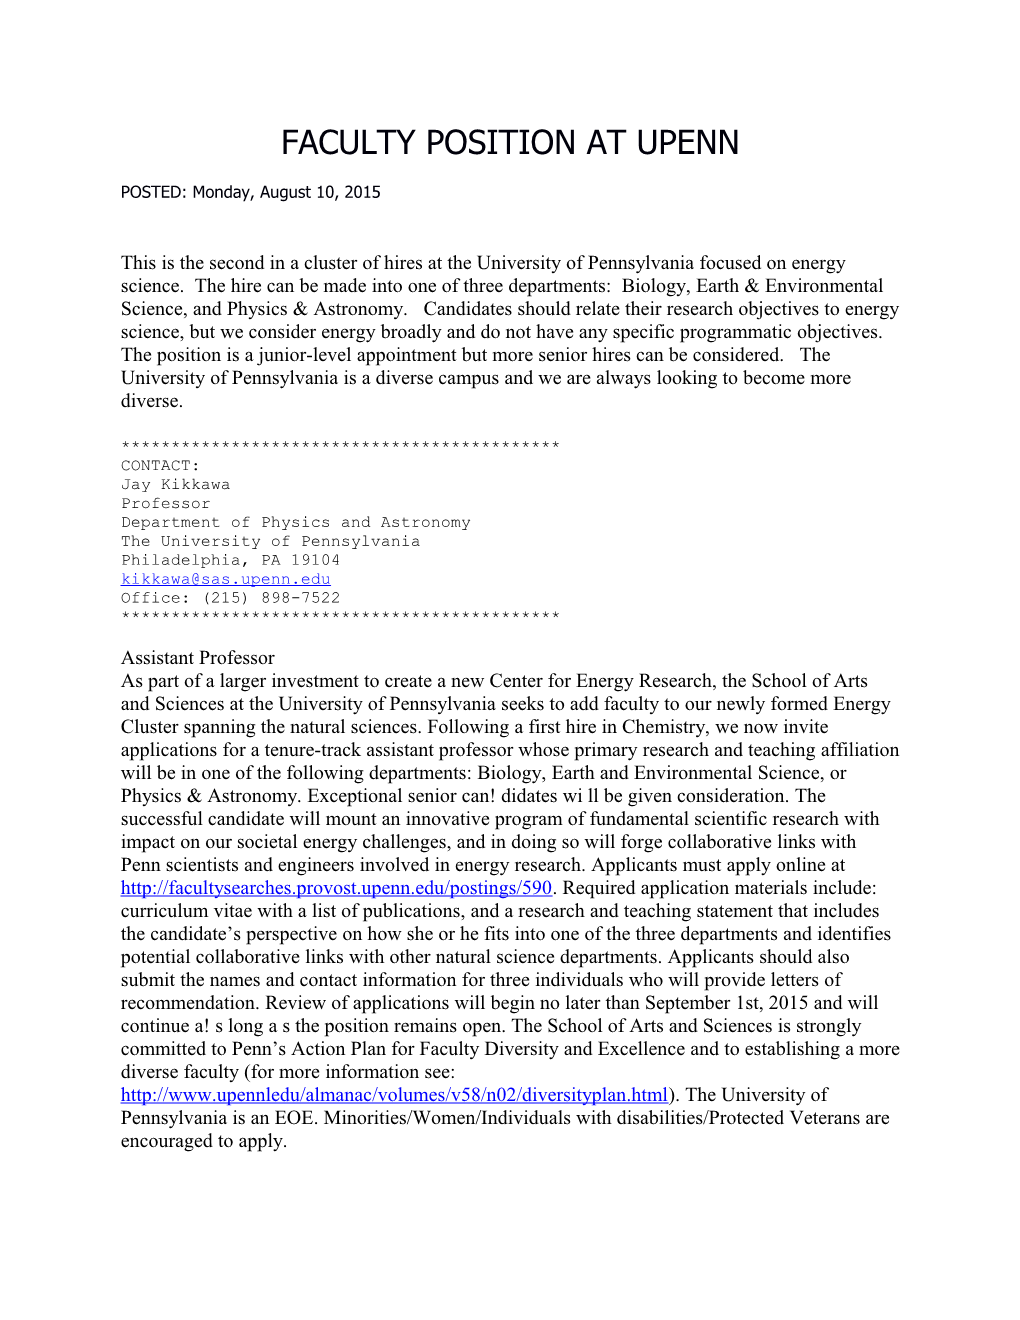 Faculty Position at Upenn